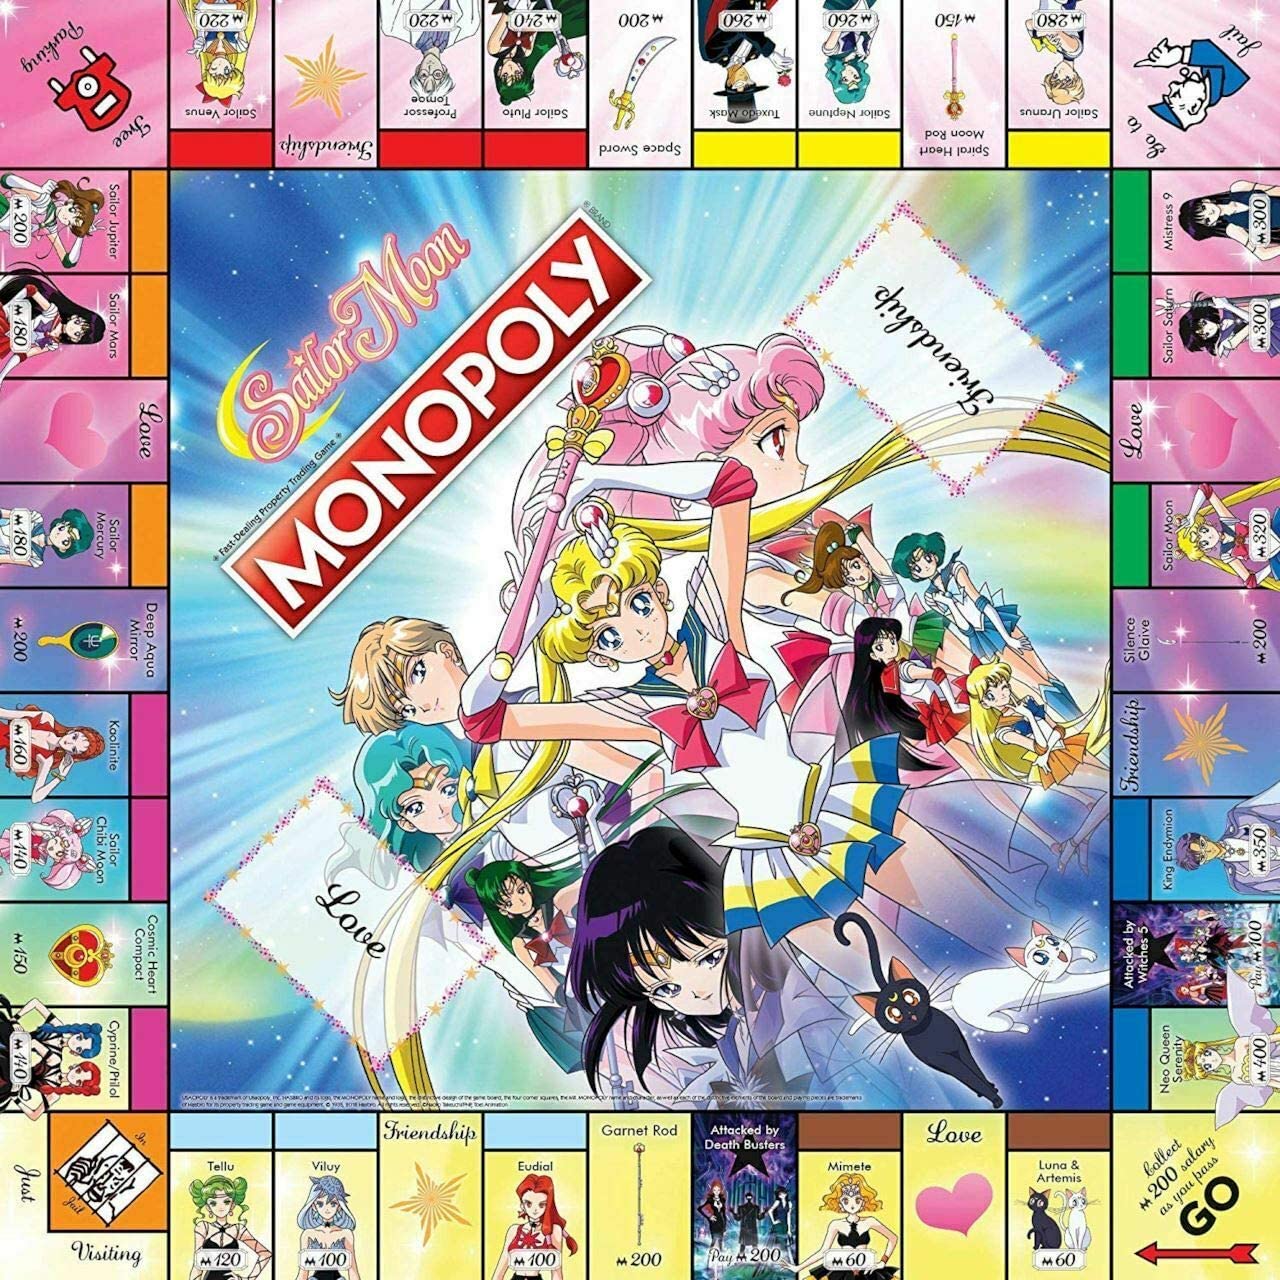 Winning Moves - Monopoly - Sailor Moon